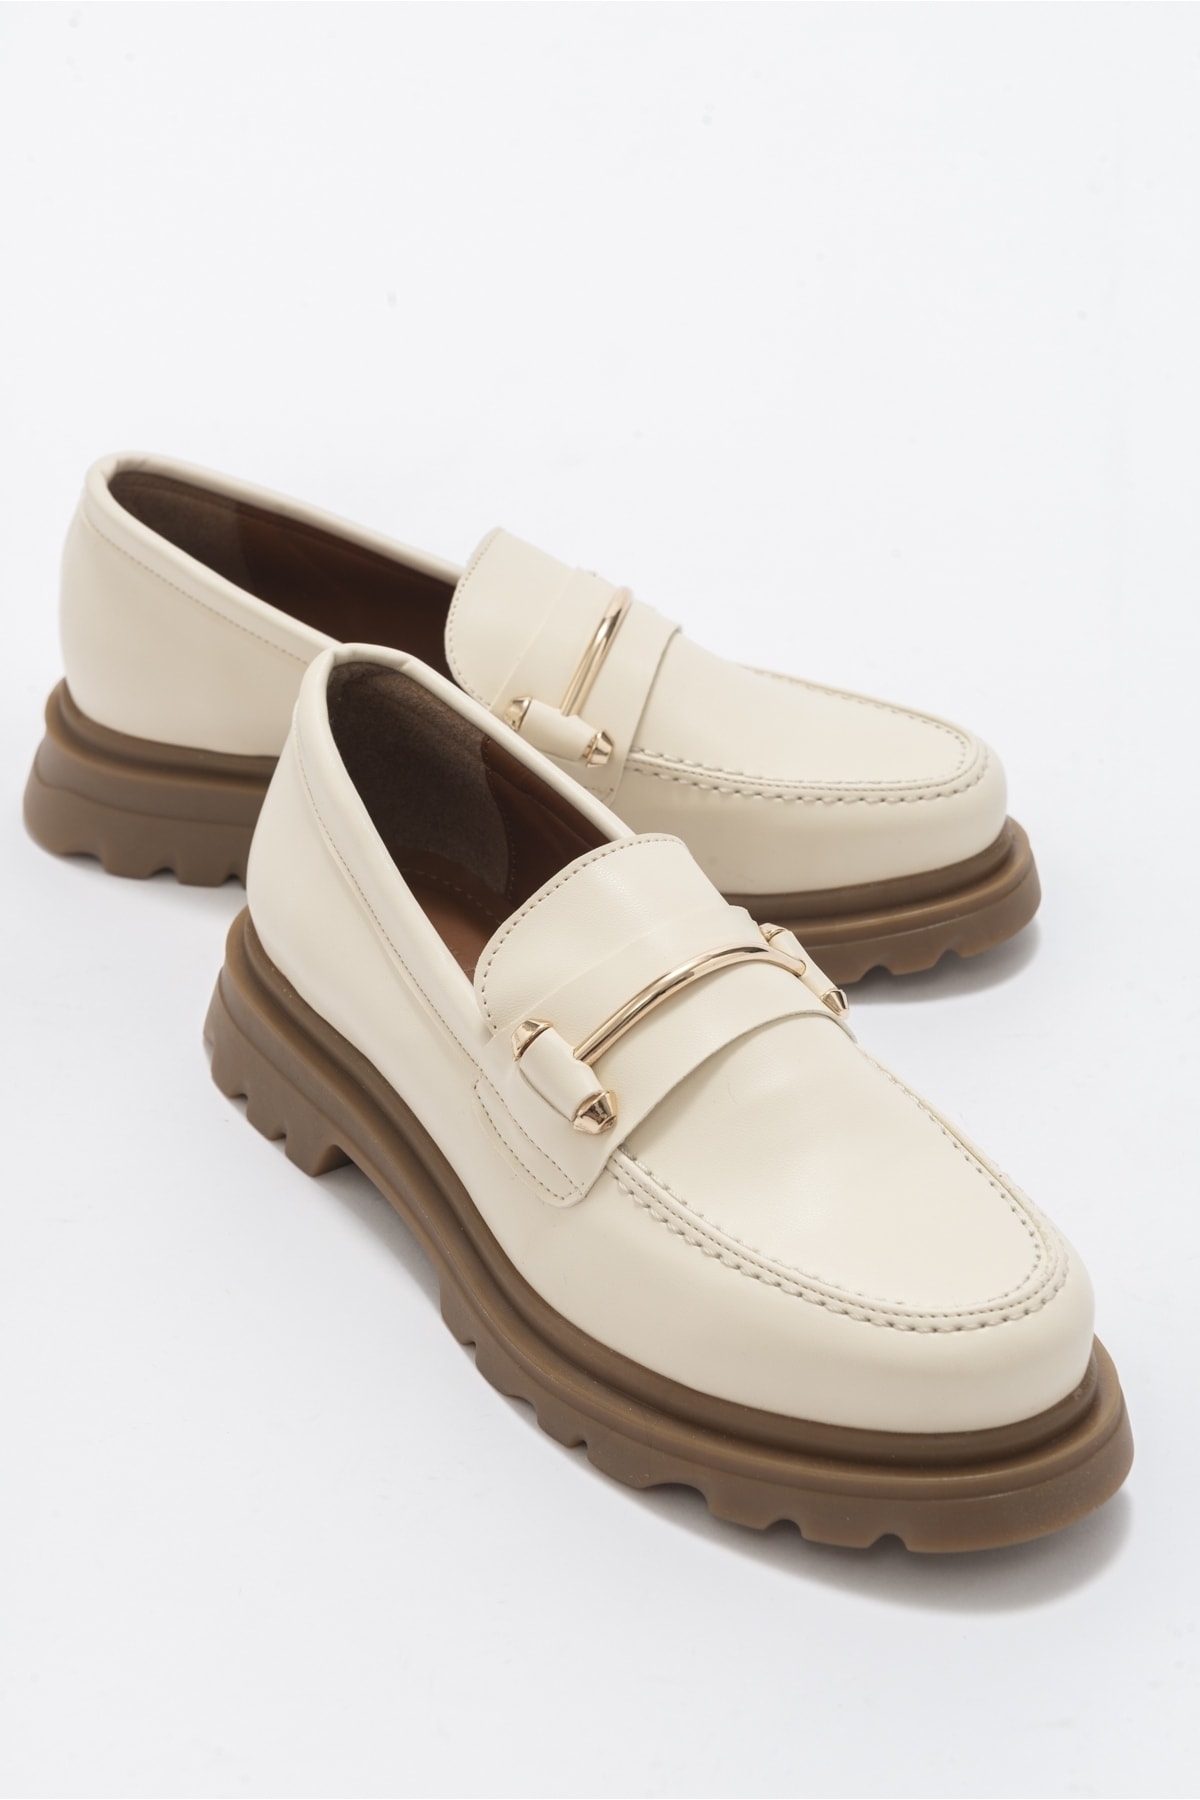 LuviShoes Dual Beige Skin Women's Oxford Shoes